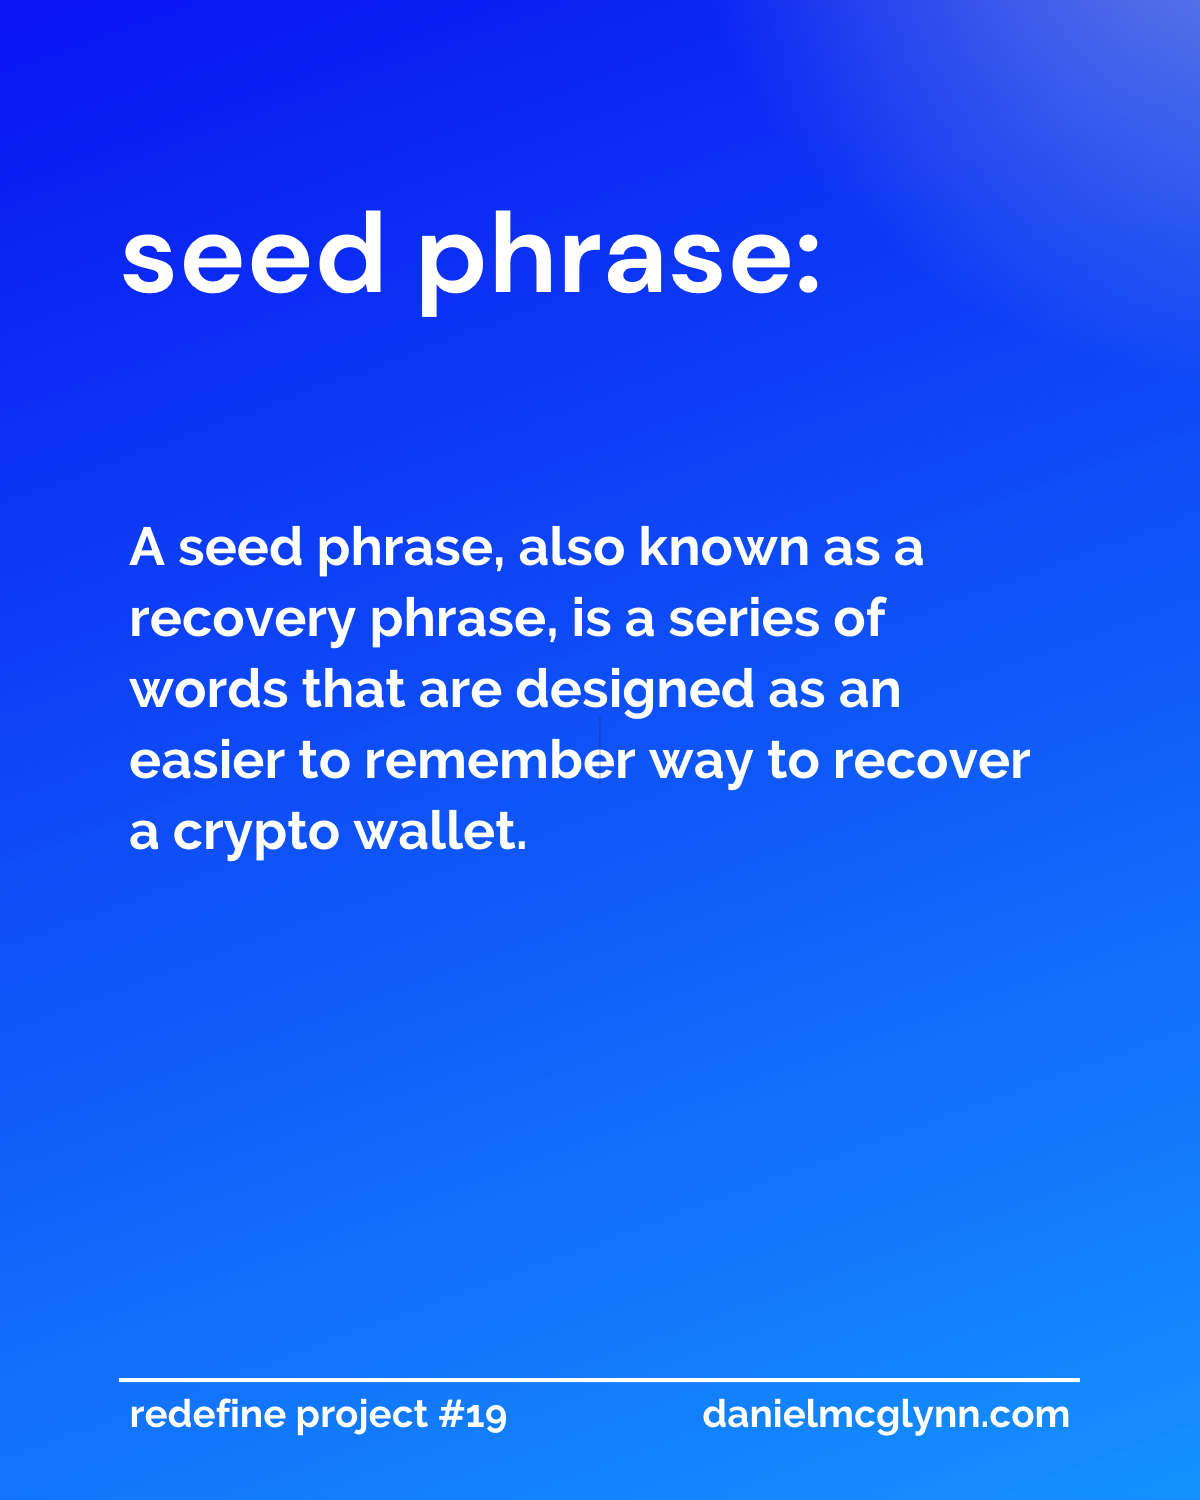 A seed phrase, also known as a recovery phrase, is a series of words that are designed as an easier to remember way to recover a crypto wallet.